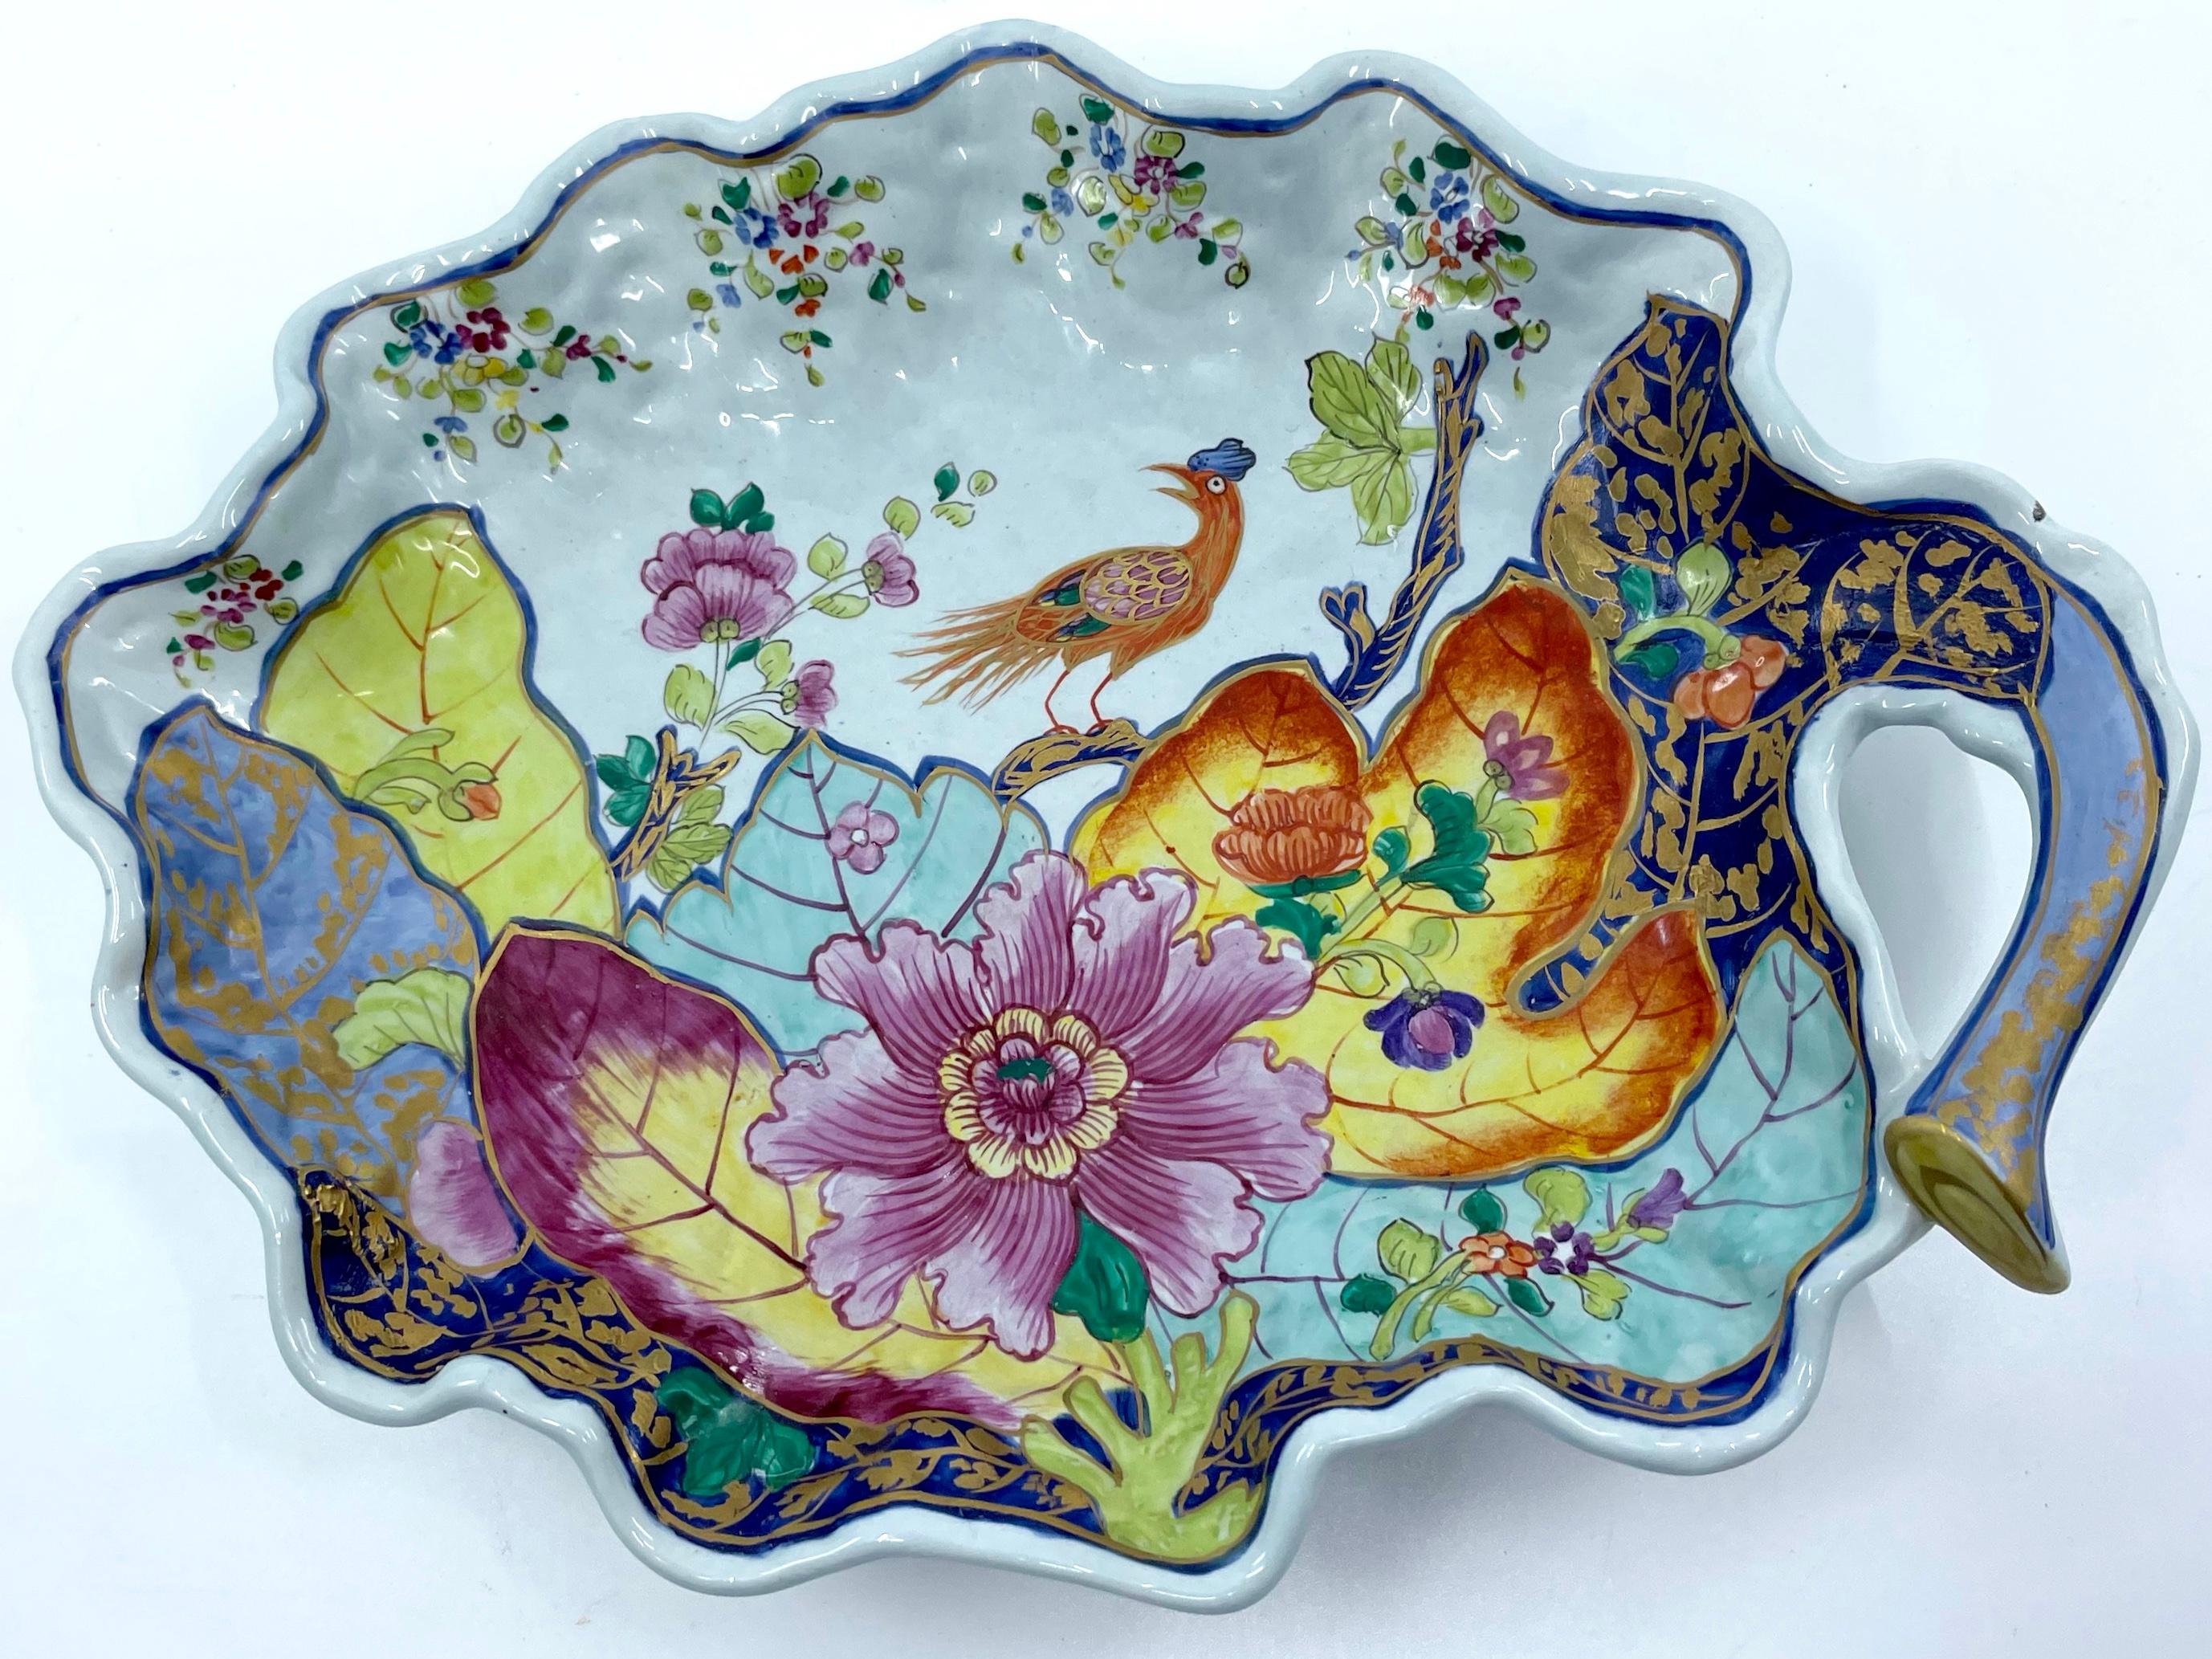 Italian floral bird Bergdorf Goodman vide poche. Pale celadon blue and vari-coloured sweet meat dish / vide poche hand painted for Bergdorf ‘s with chinoiserie bird and flowers. The kind of original quality decorative goods for which Bergdorf was